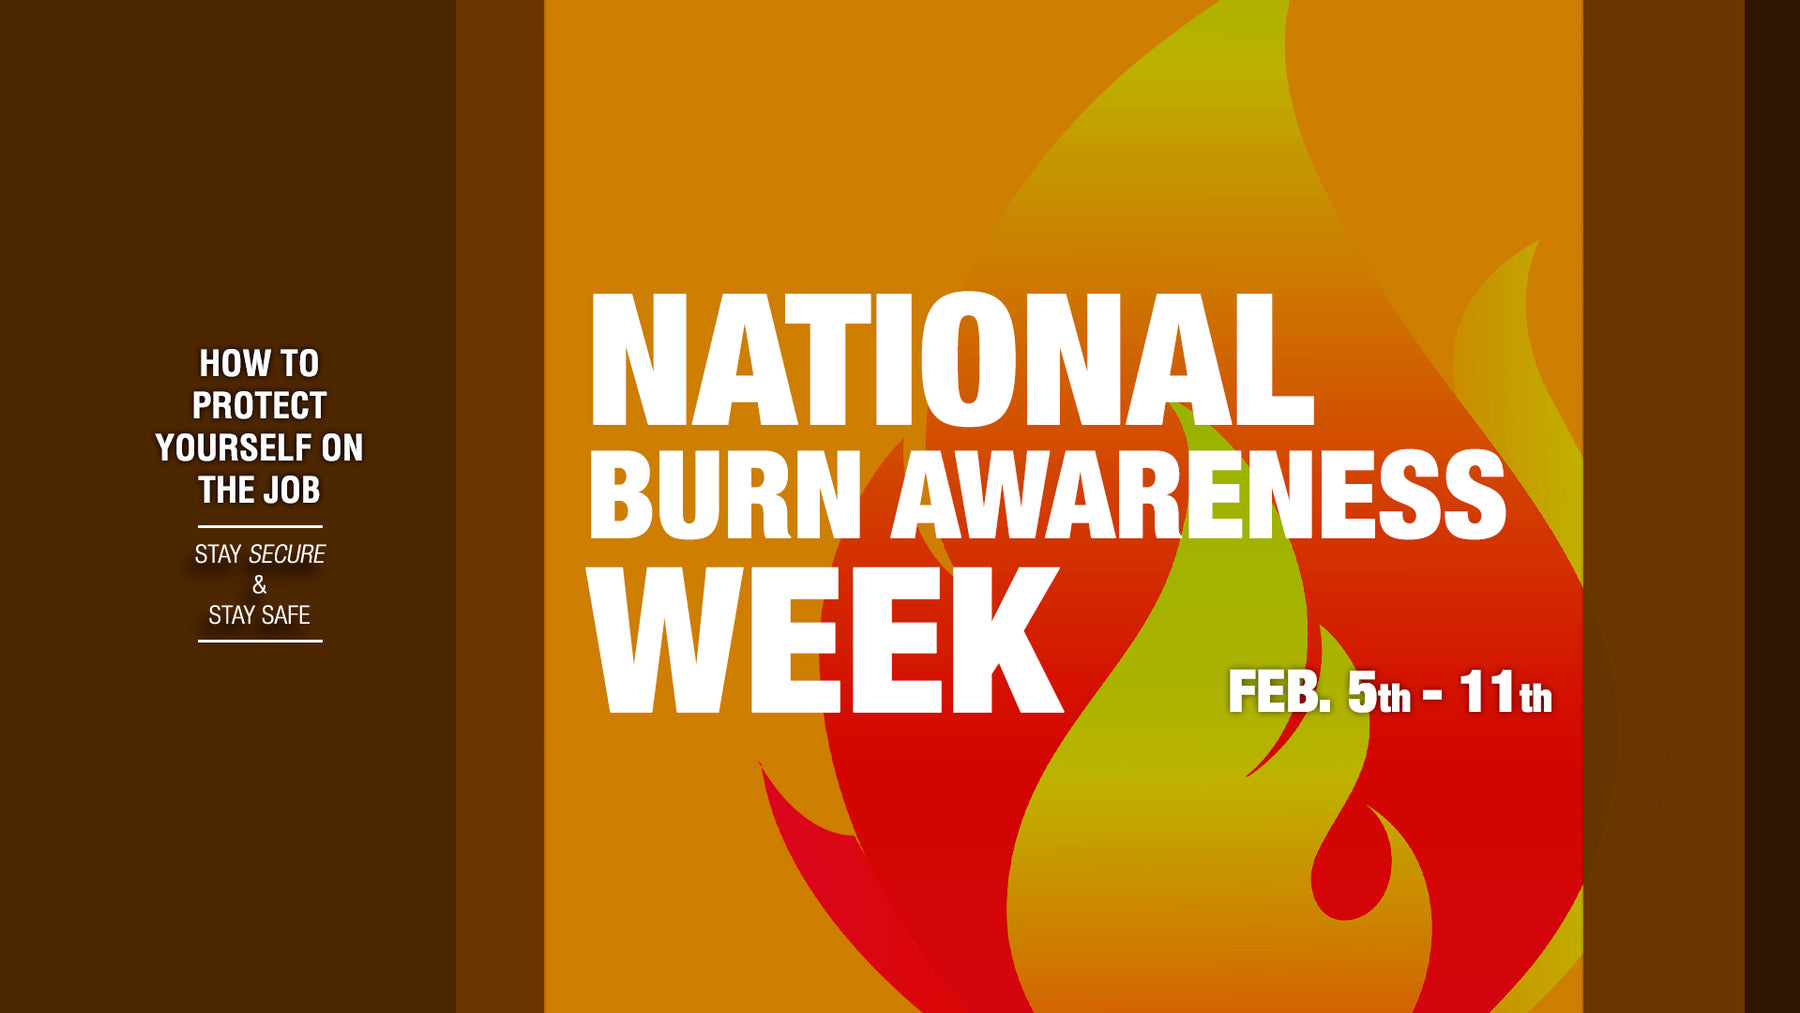 National Burn Awareness Week: How to Protect Yourself on the Job